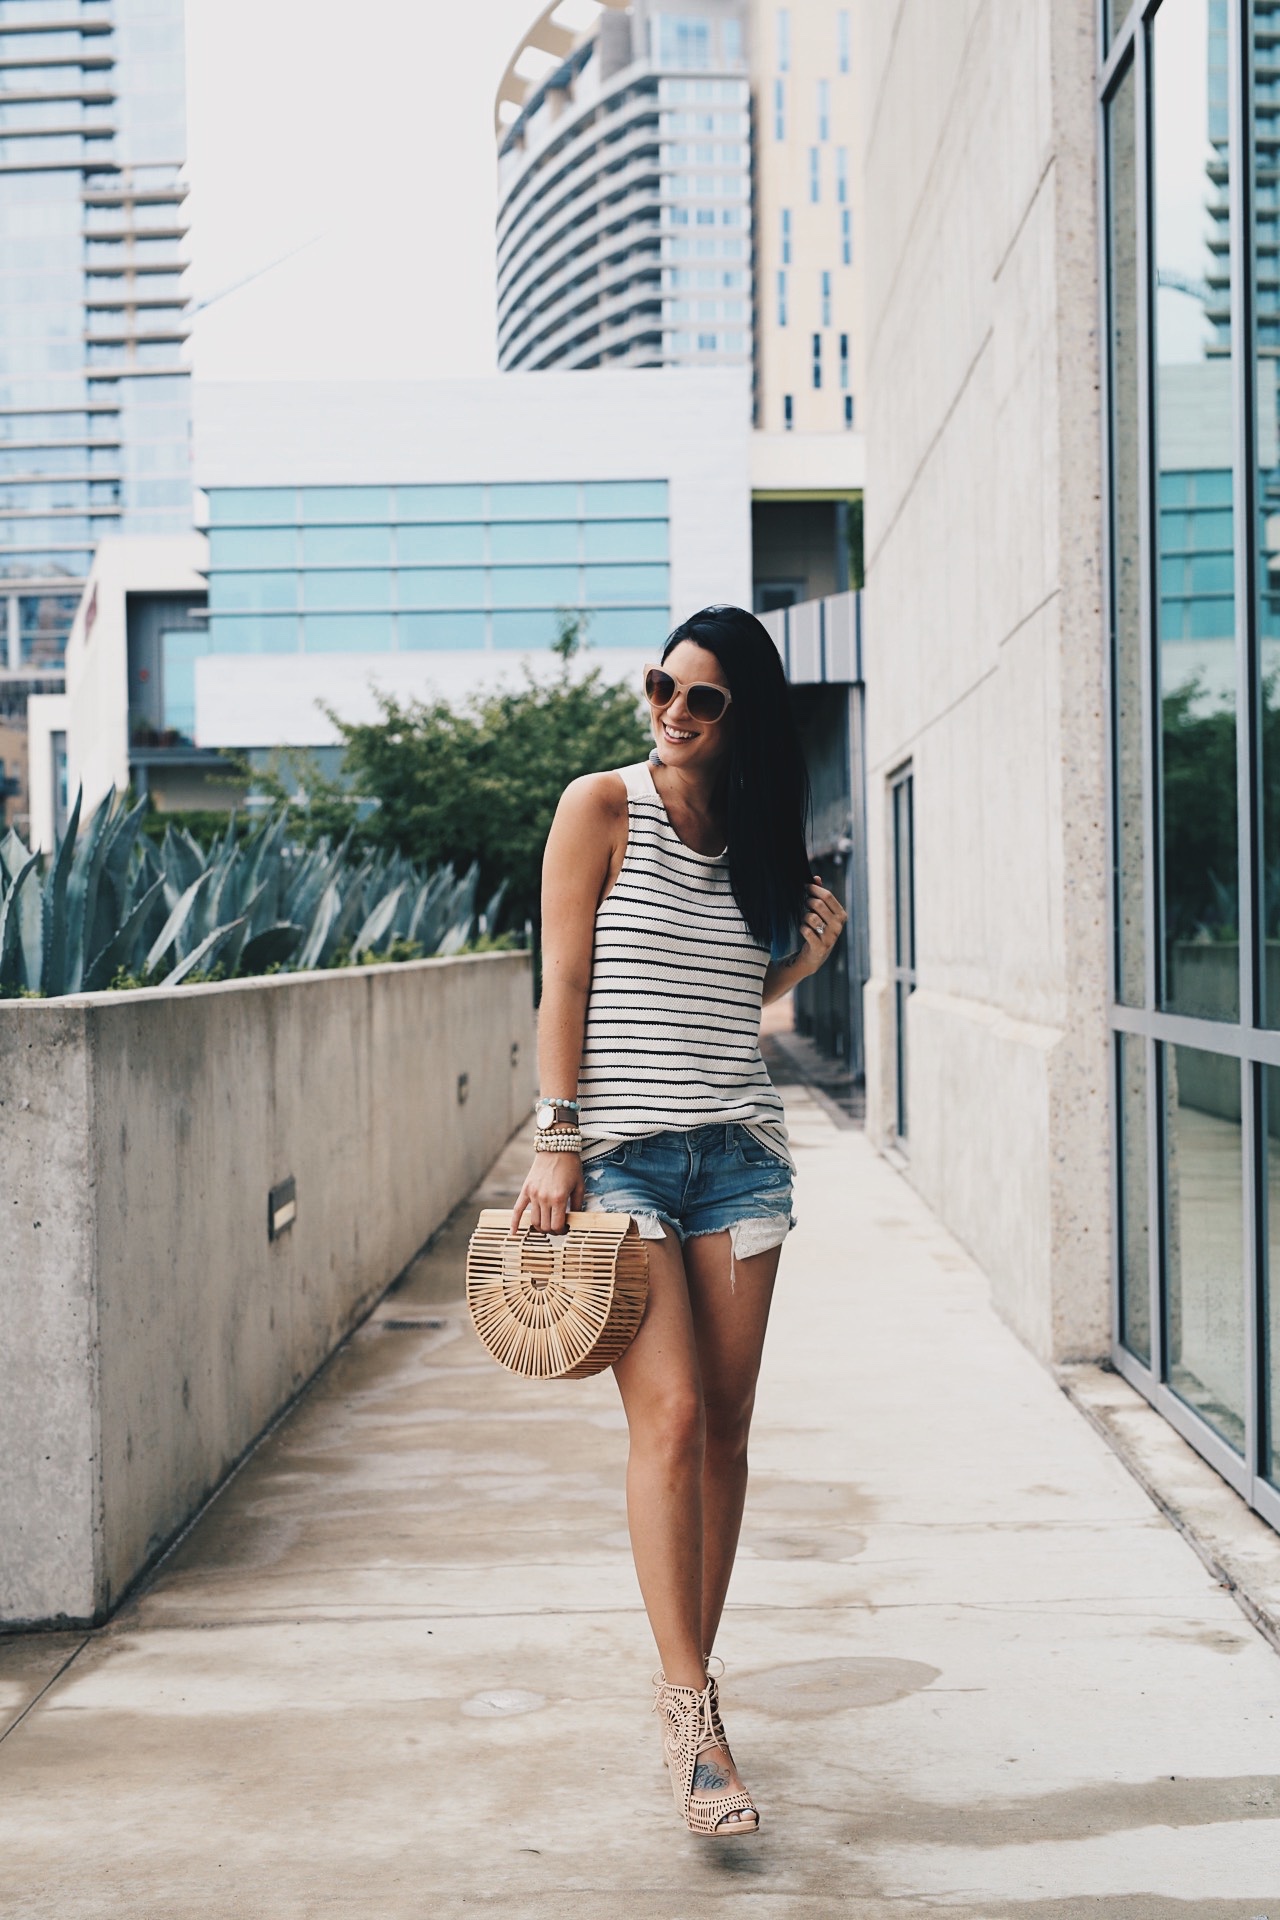 DTKAustin shares her tips and tricks to efficiently shop the Nordstrom Anniversary Sale, NSALE for 2017. Click for more information and photos. | how to style a waffle-knit top | how to wear a waffle-knit top | how to wear cutoff shorts | how to style cutoff shorts | waffle-knit top style tips | summer fashion tips | summer outfit ideas | summer style tips | what to wear for summer | warm weather fashion | fashion for summer | style tips for summer | outfit ideas for summer || Dressed to Kill